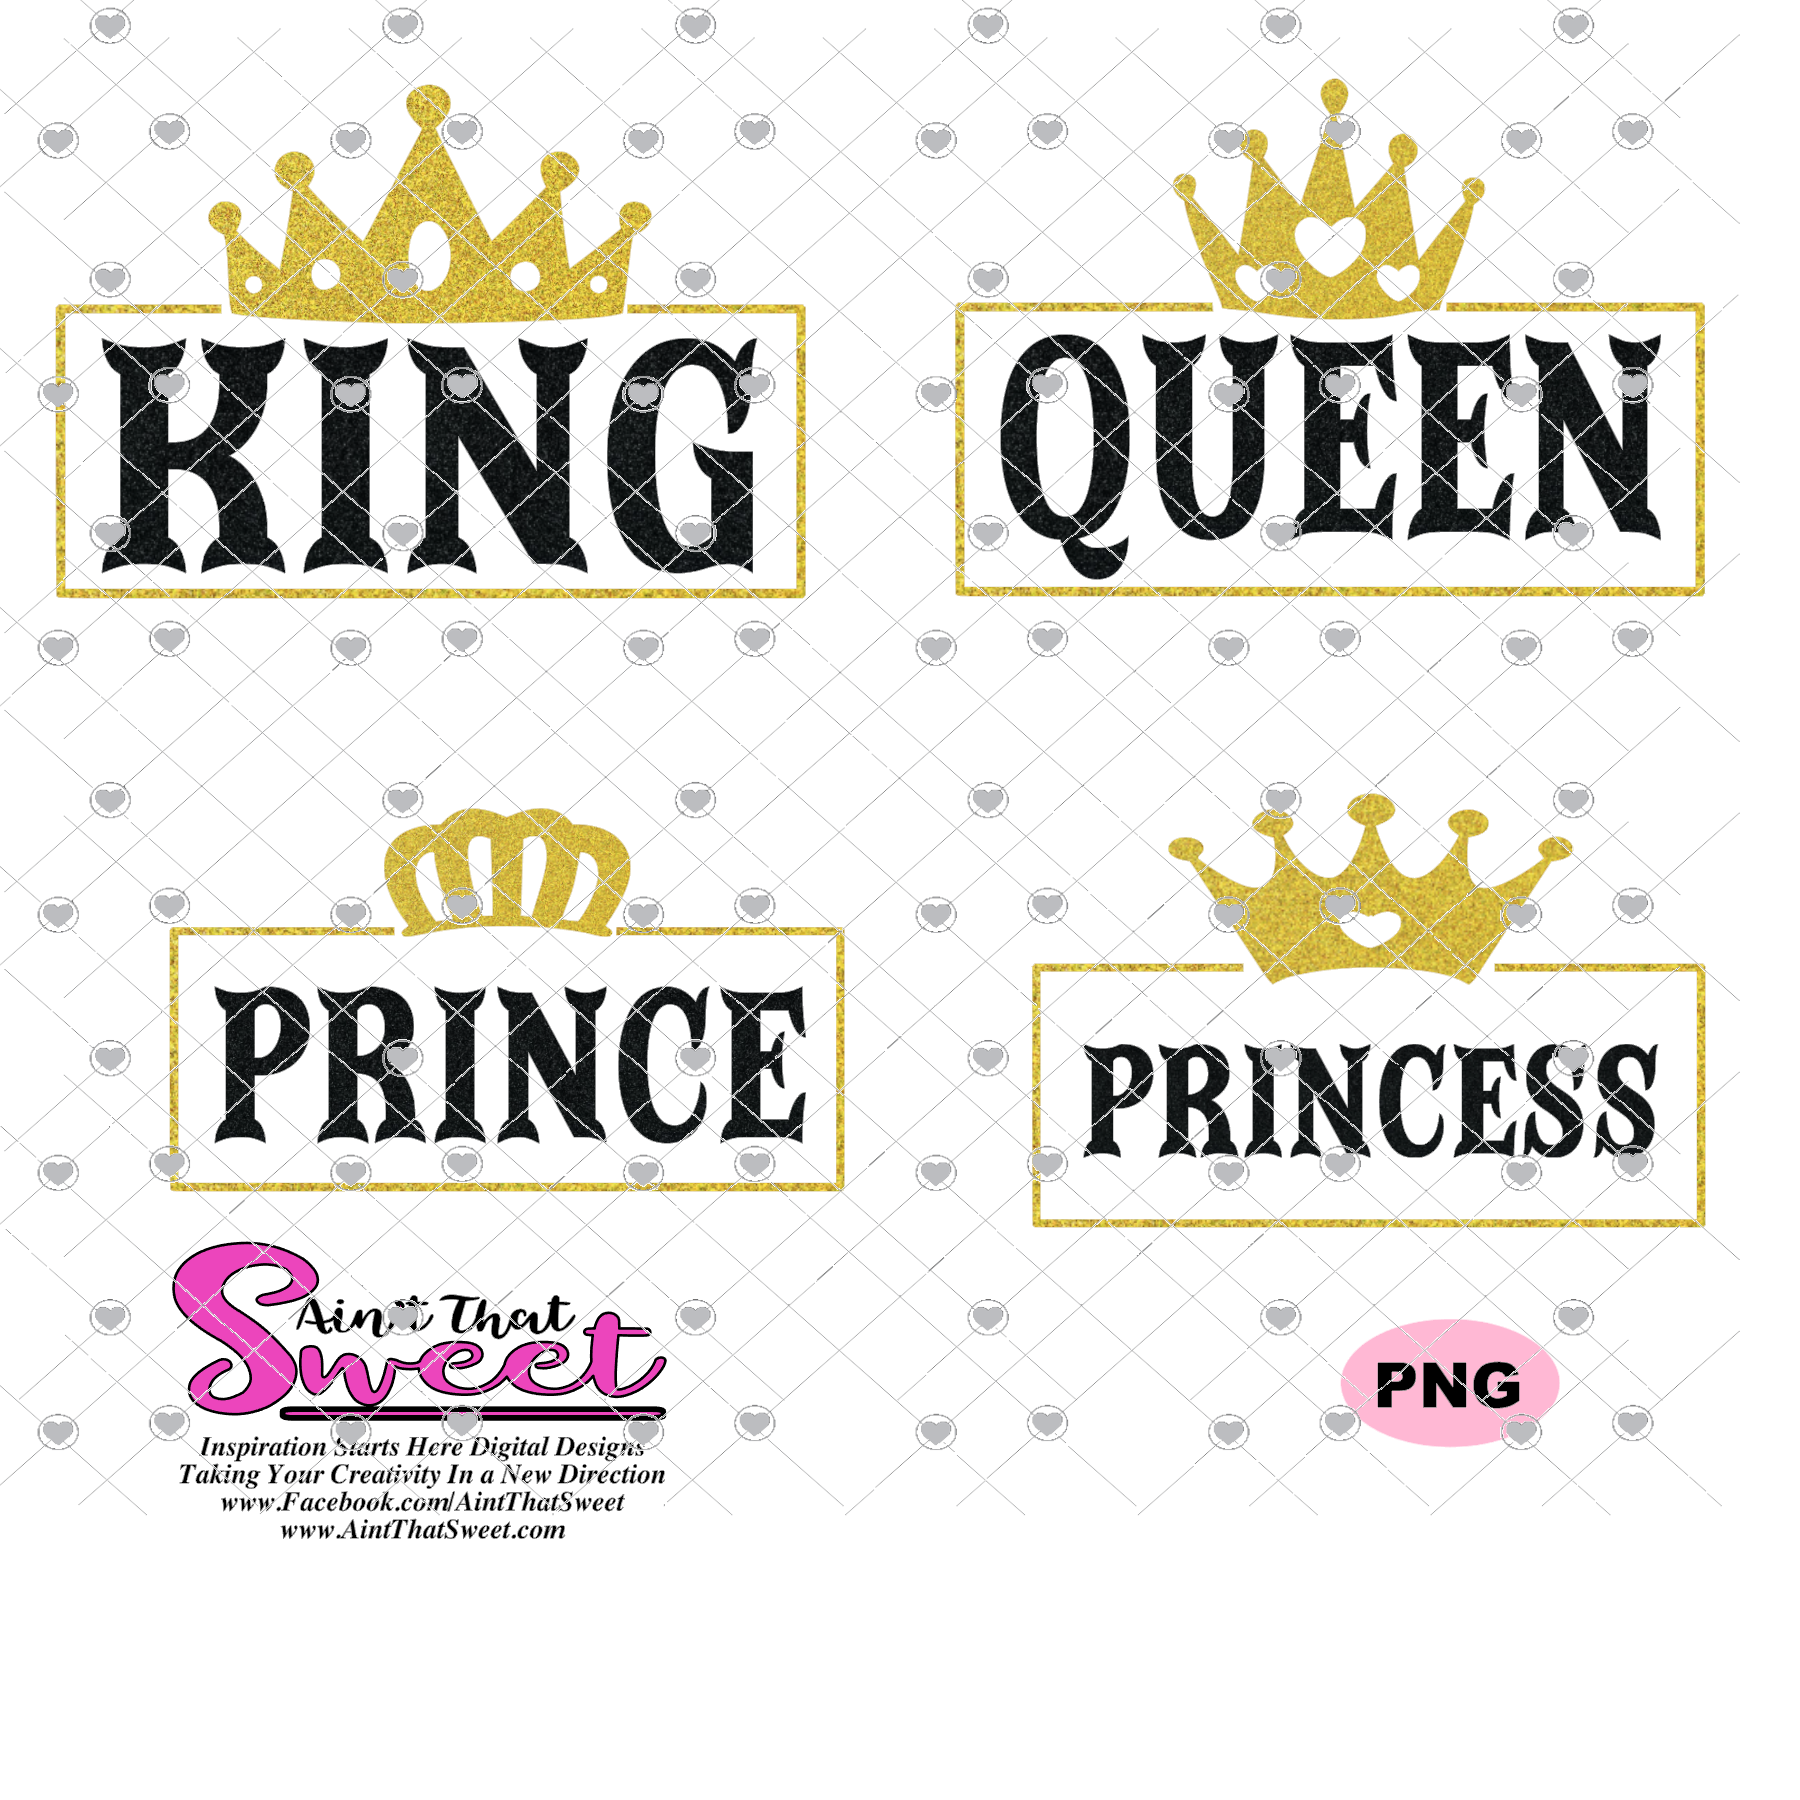 Download King Queen Prince Princess With Crowns - Transparent PNG ...